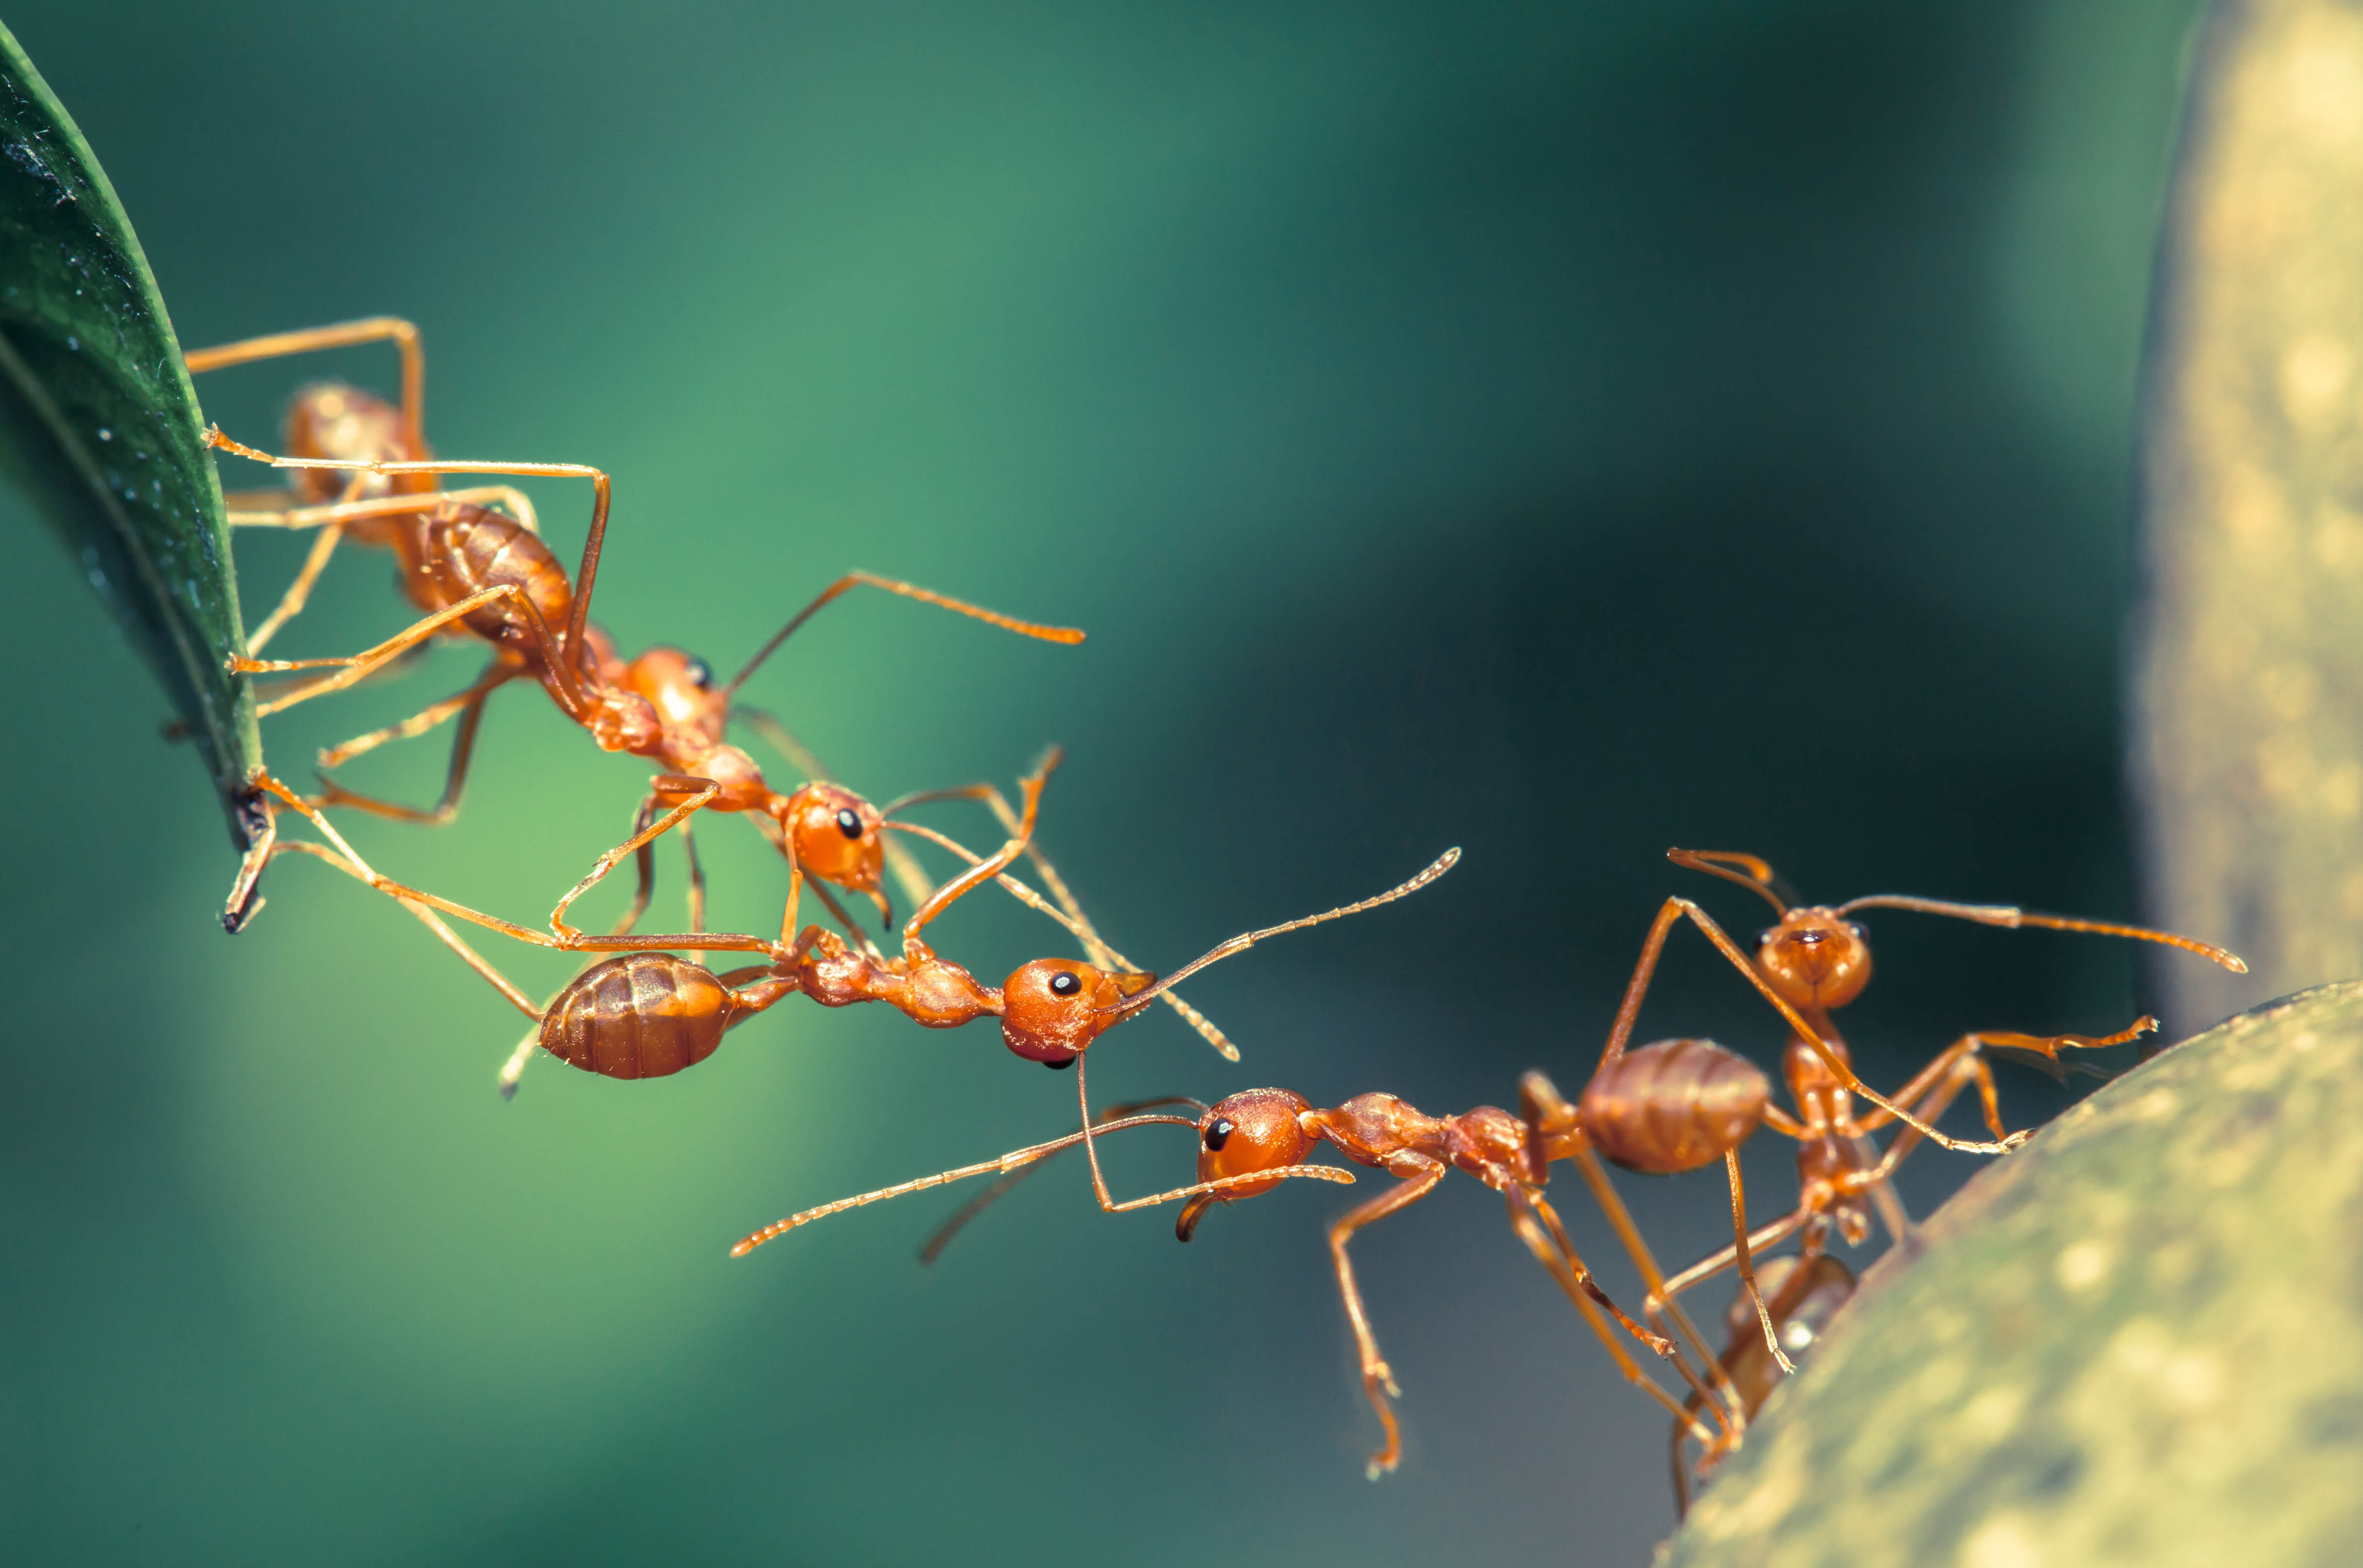 Scientists have found a new species of exploding ants